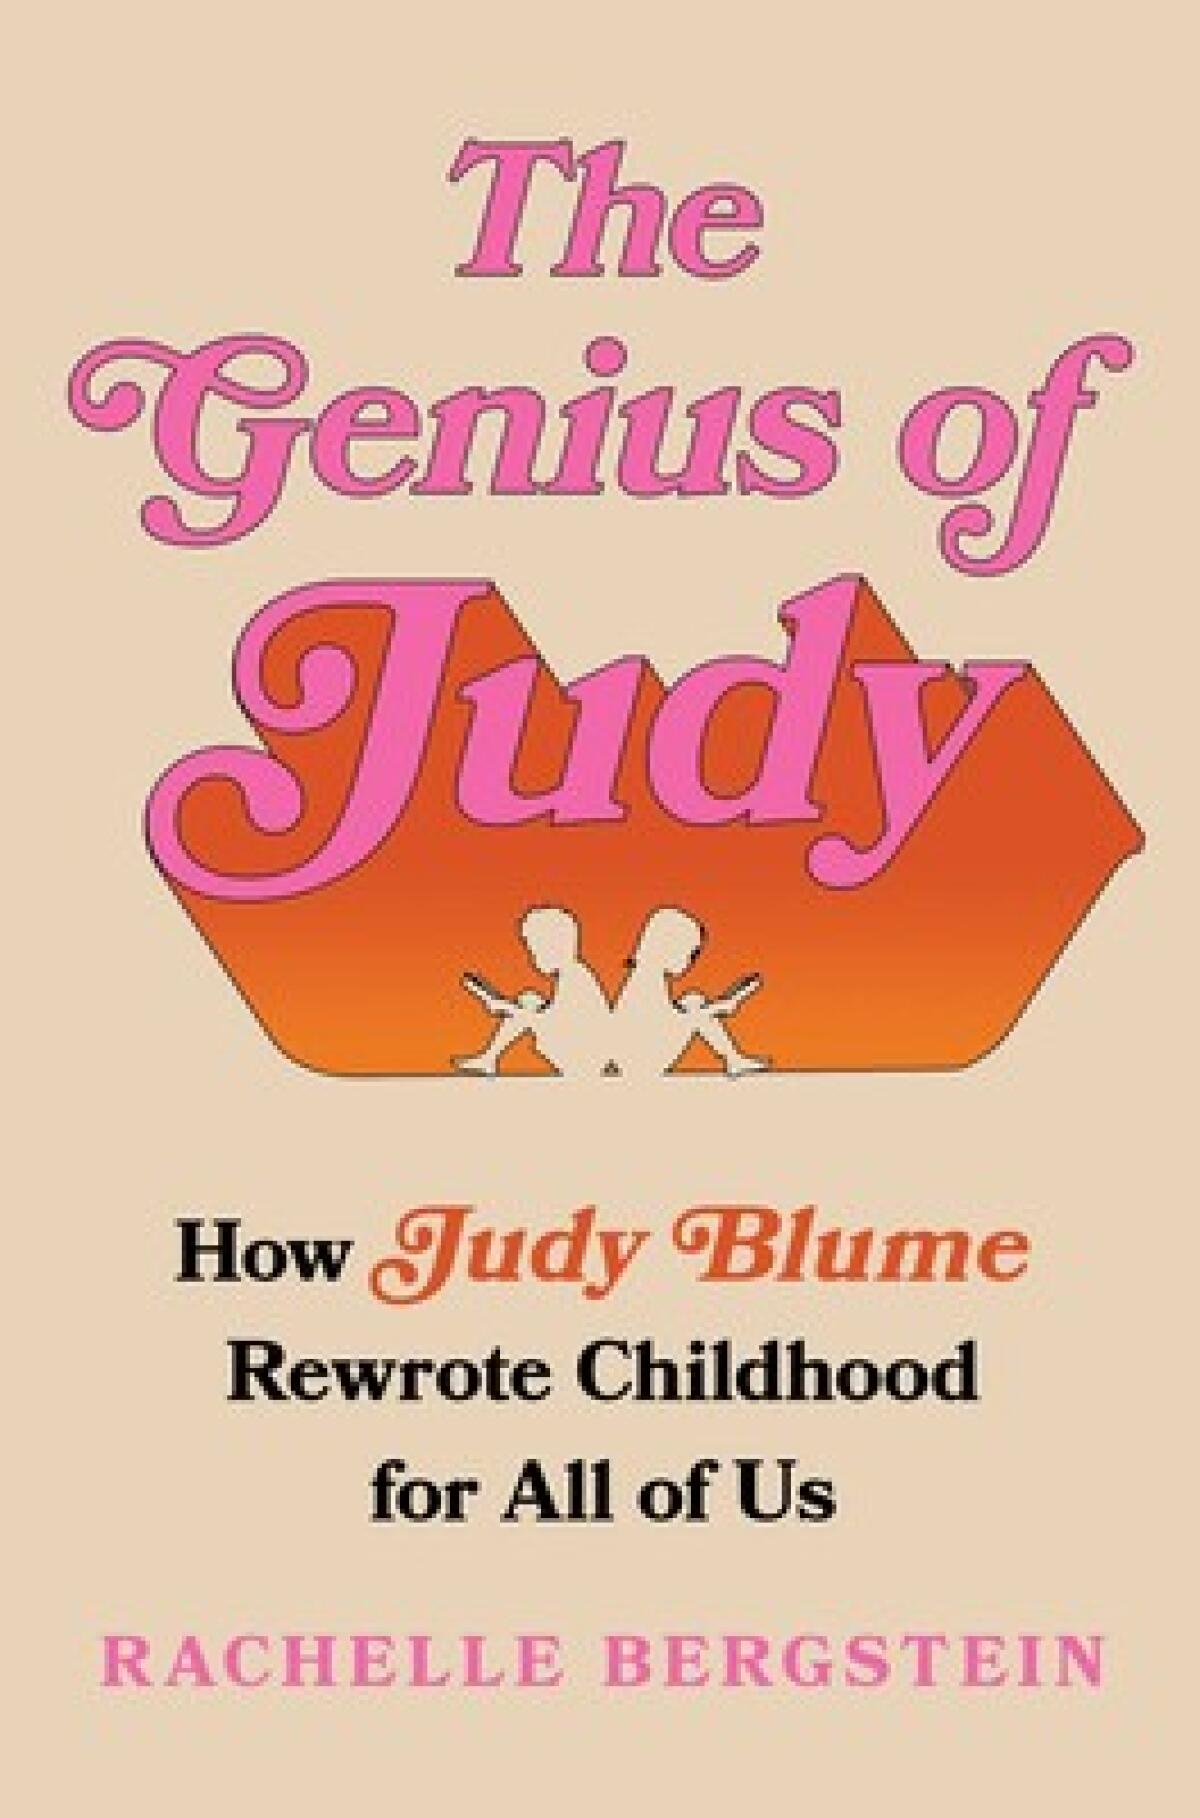 Cover of "The Genius of Judy"